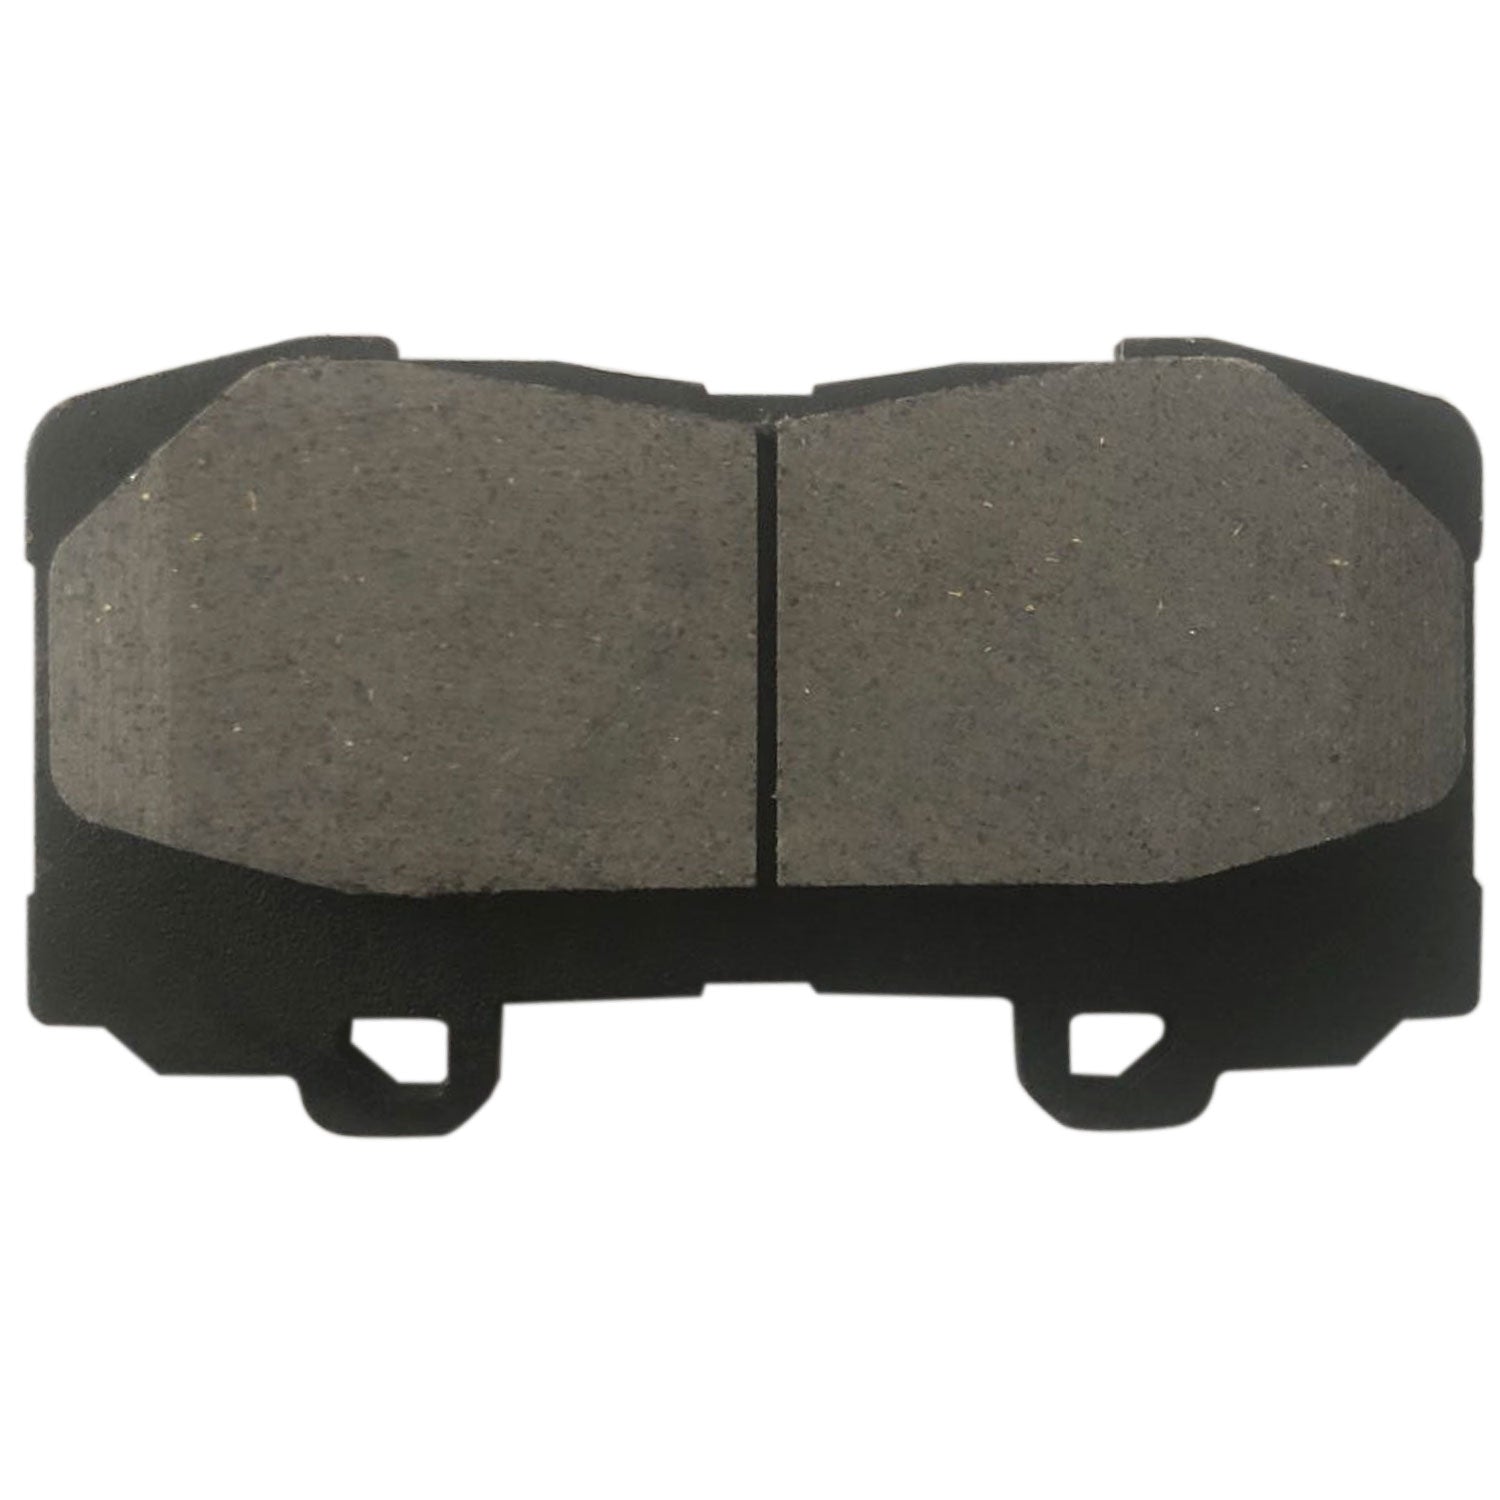 JADODE Front Ceramic Brake Pads Kit for 2015 2016 2017-2020 Chevy Colorado Gmc Canyon